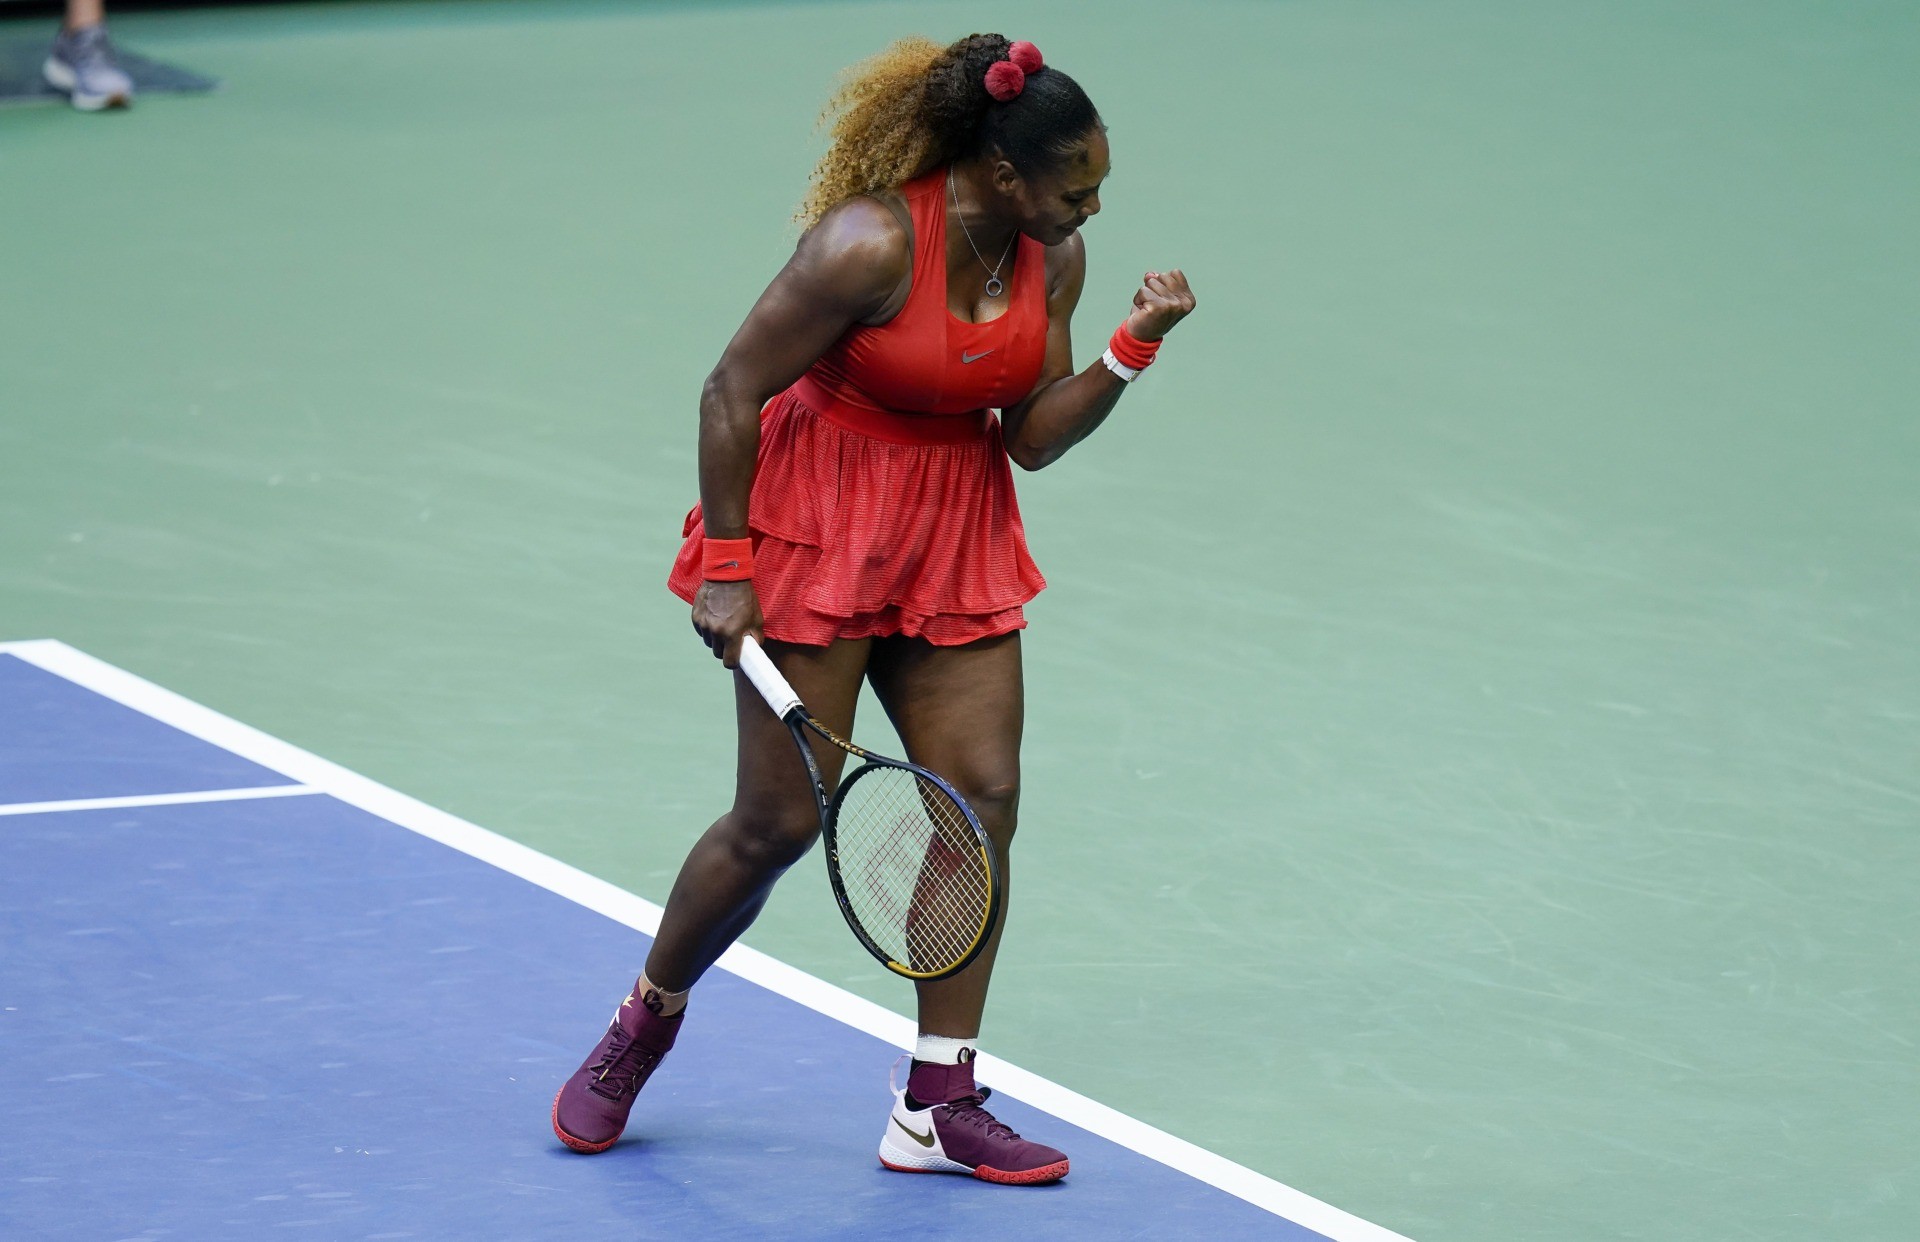 Serena Williams won a match and then went out to watch her sister Venus pla...